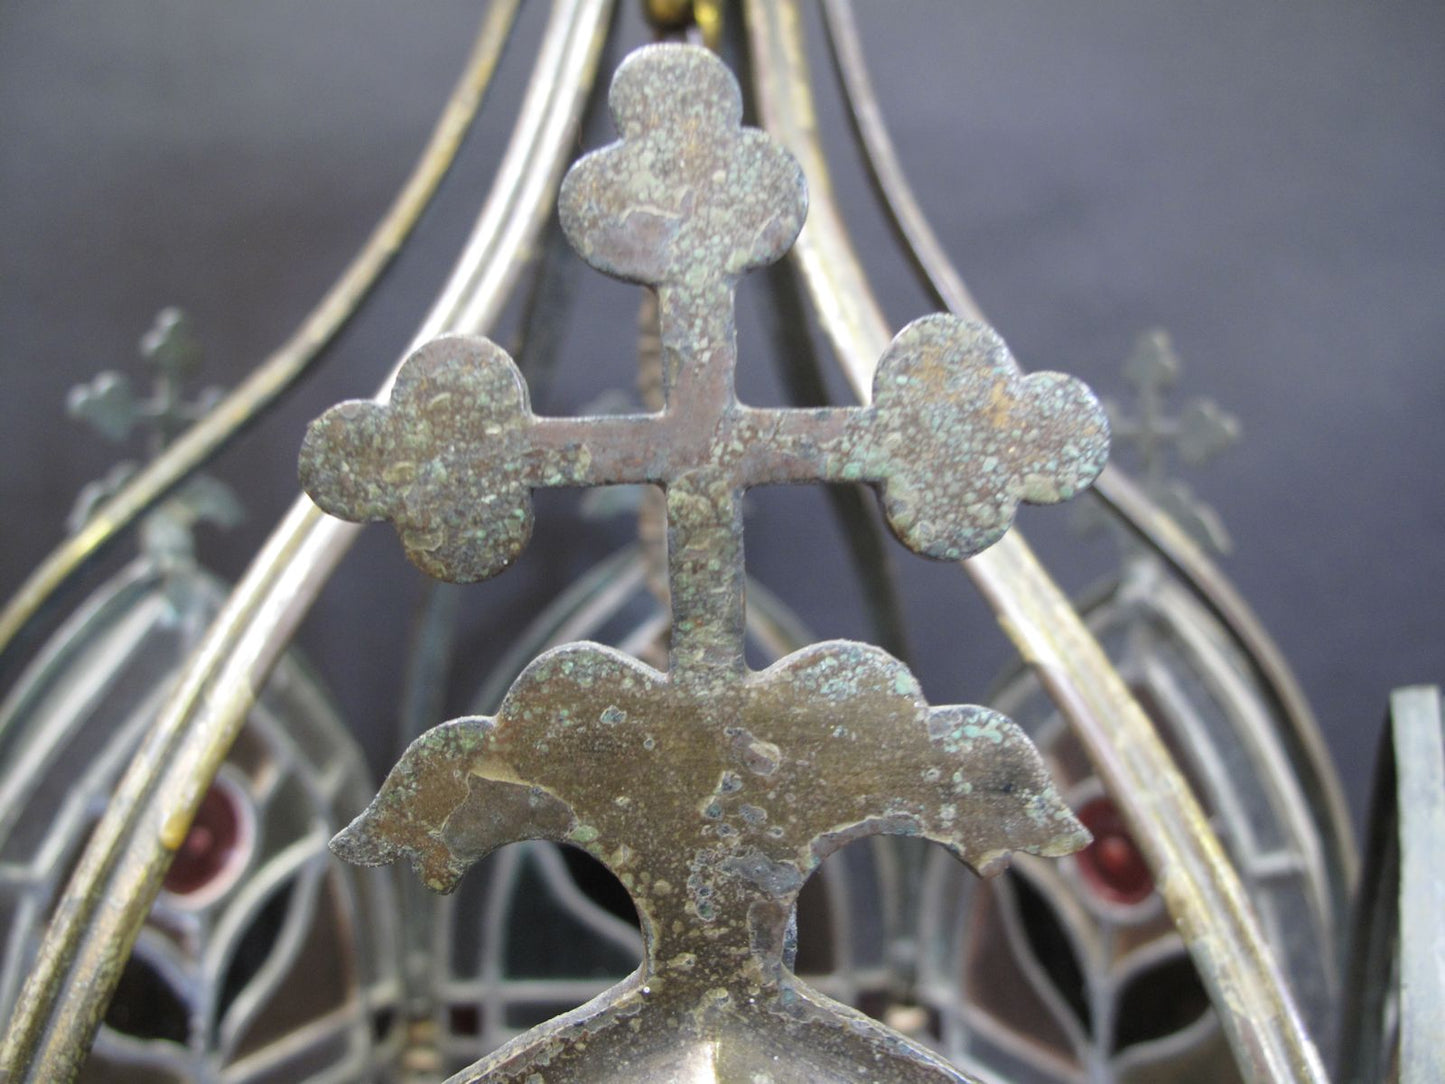 close up view of cross brass casting